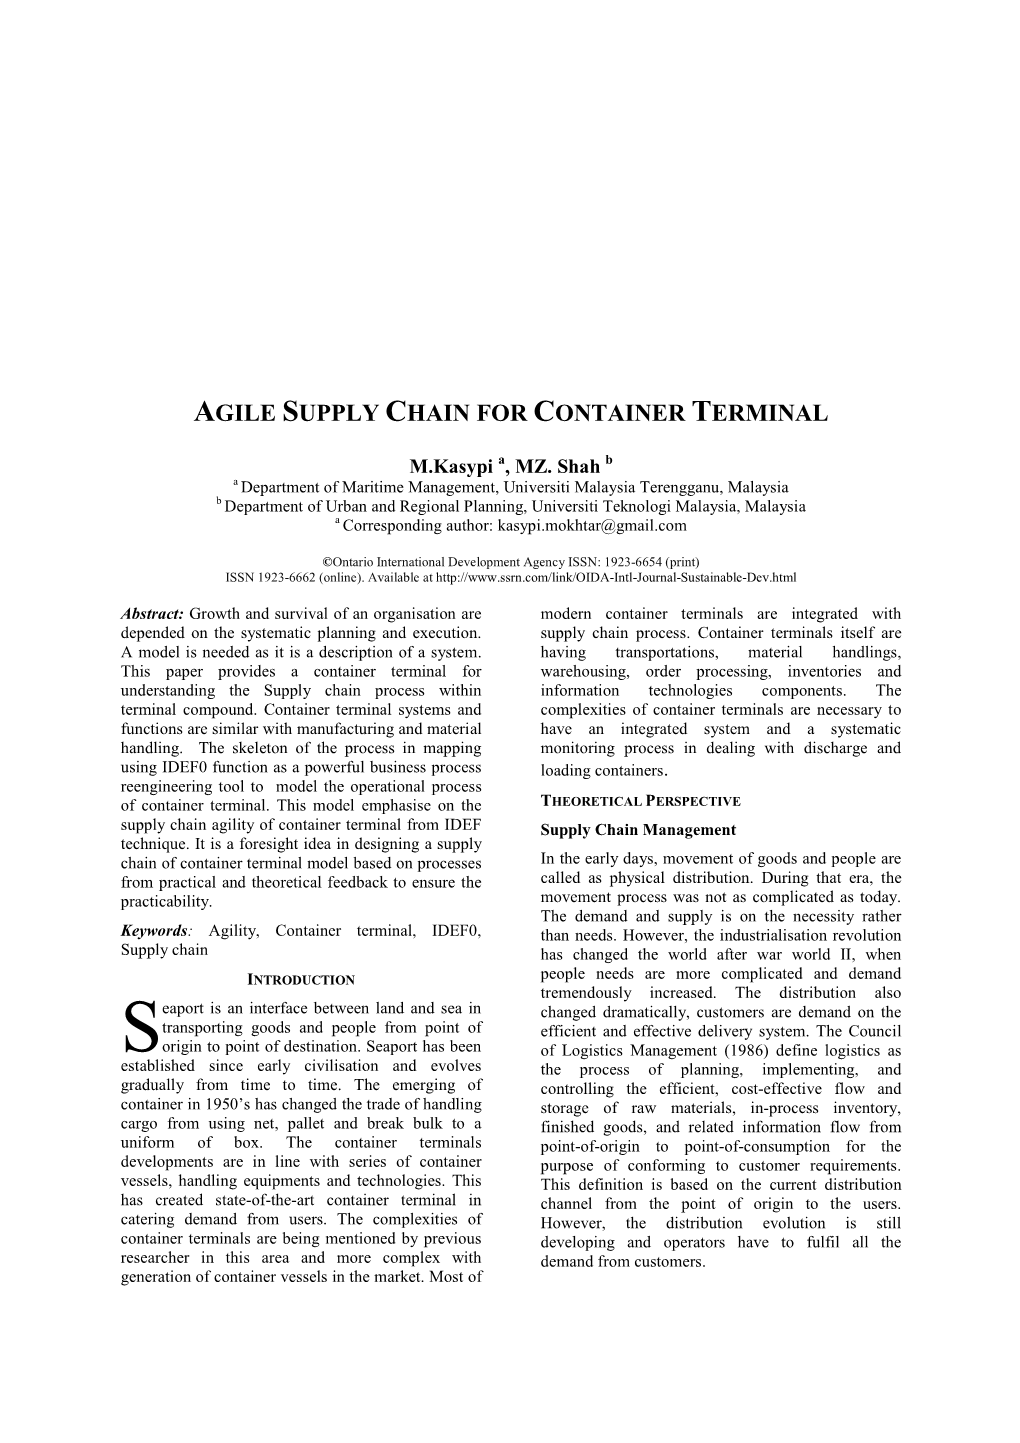 Agile Supply Chain for Container Terminal